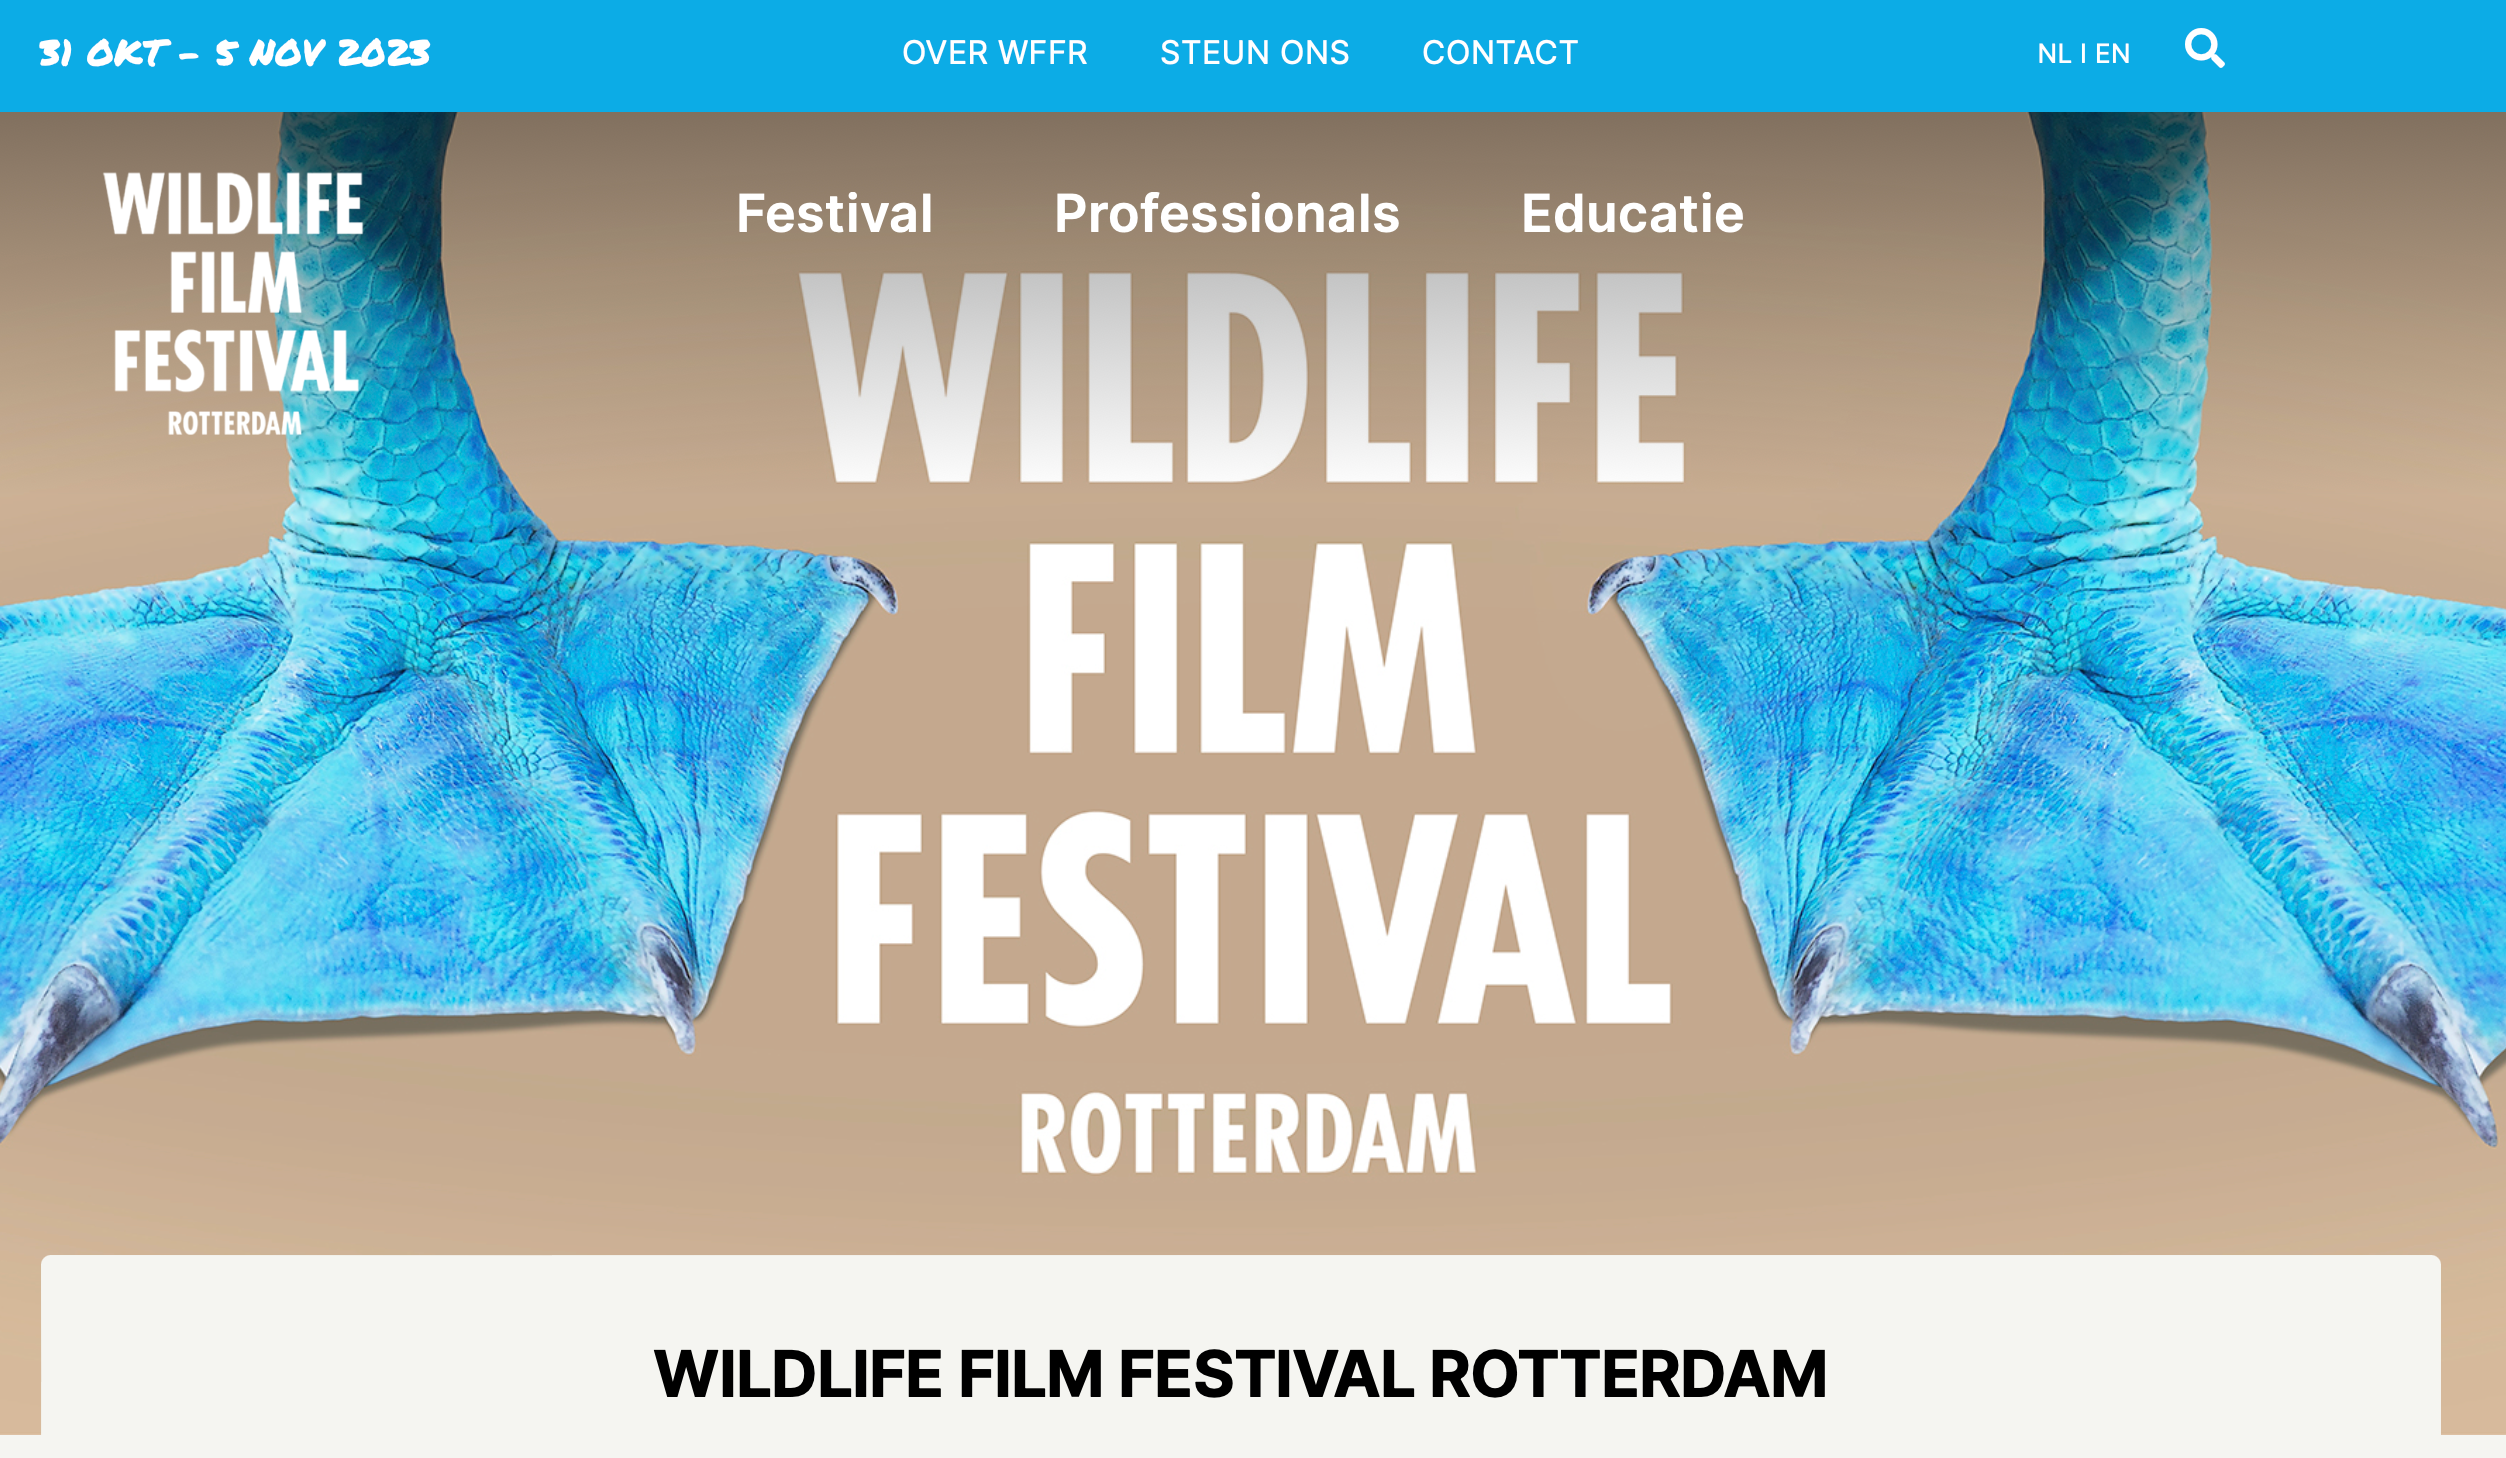 “Remembering Sudan” to Join the Docket of Educational Films at the Wildlife Film Festival Rotterdam